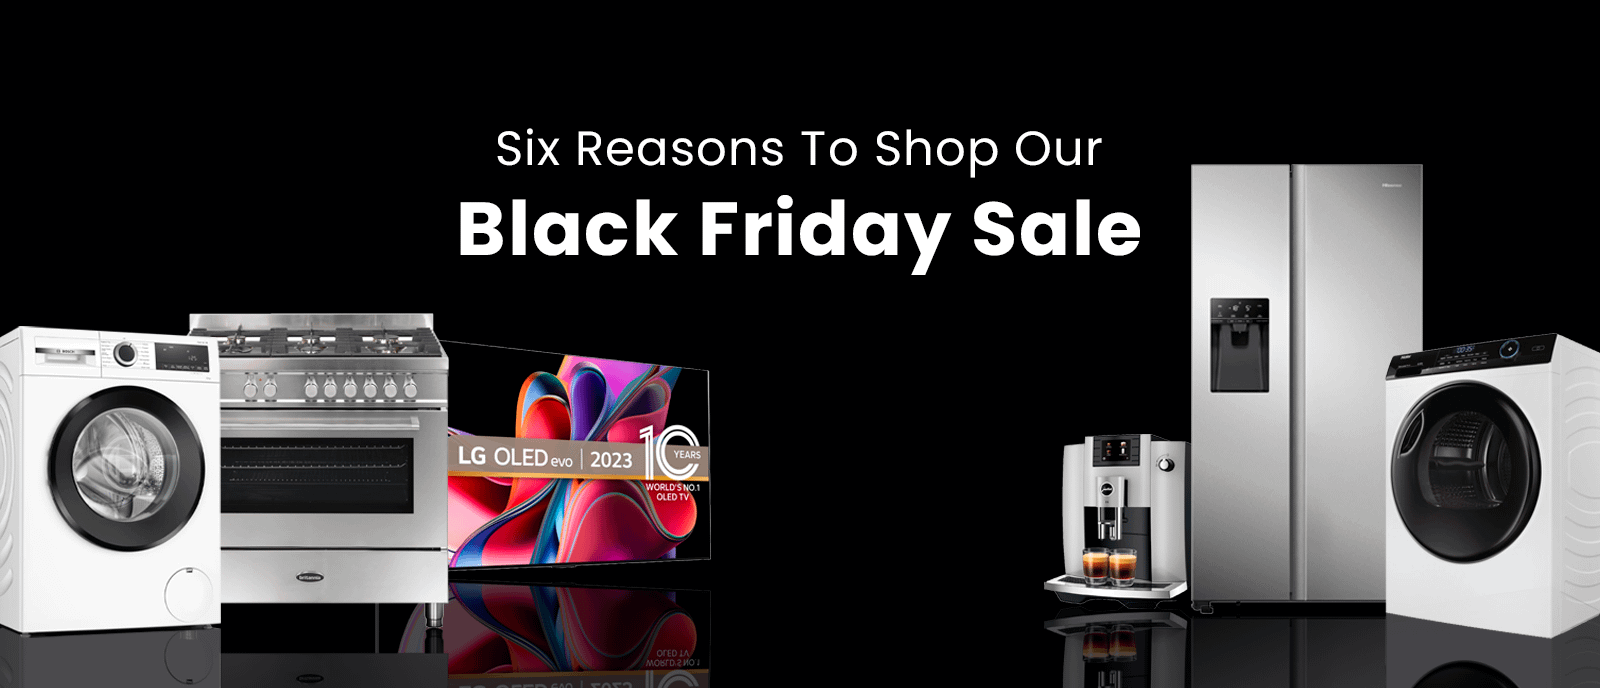 Six Reasons To Shop Our Black Friday Sale